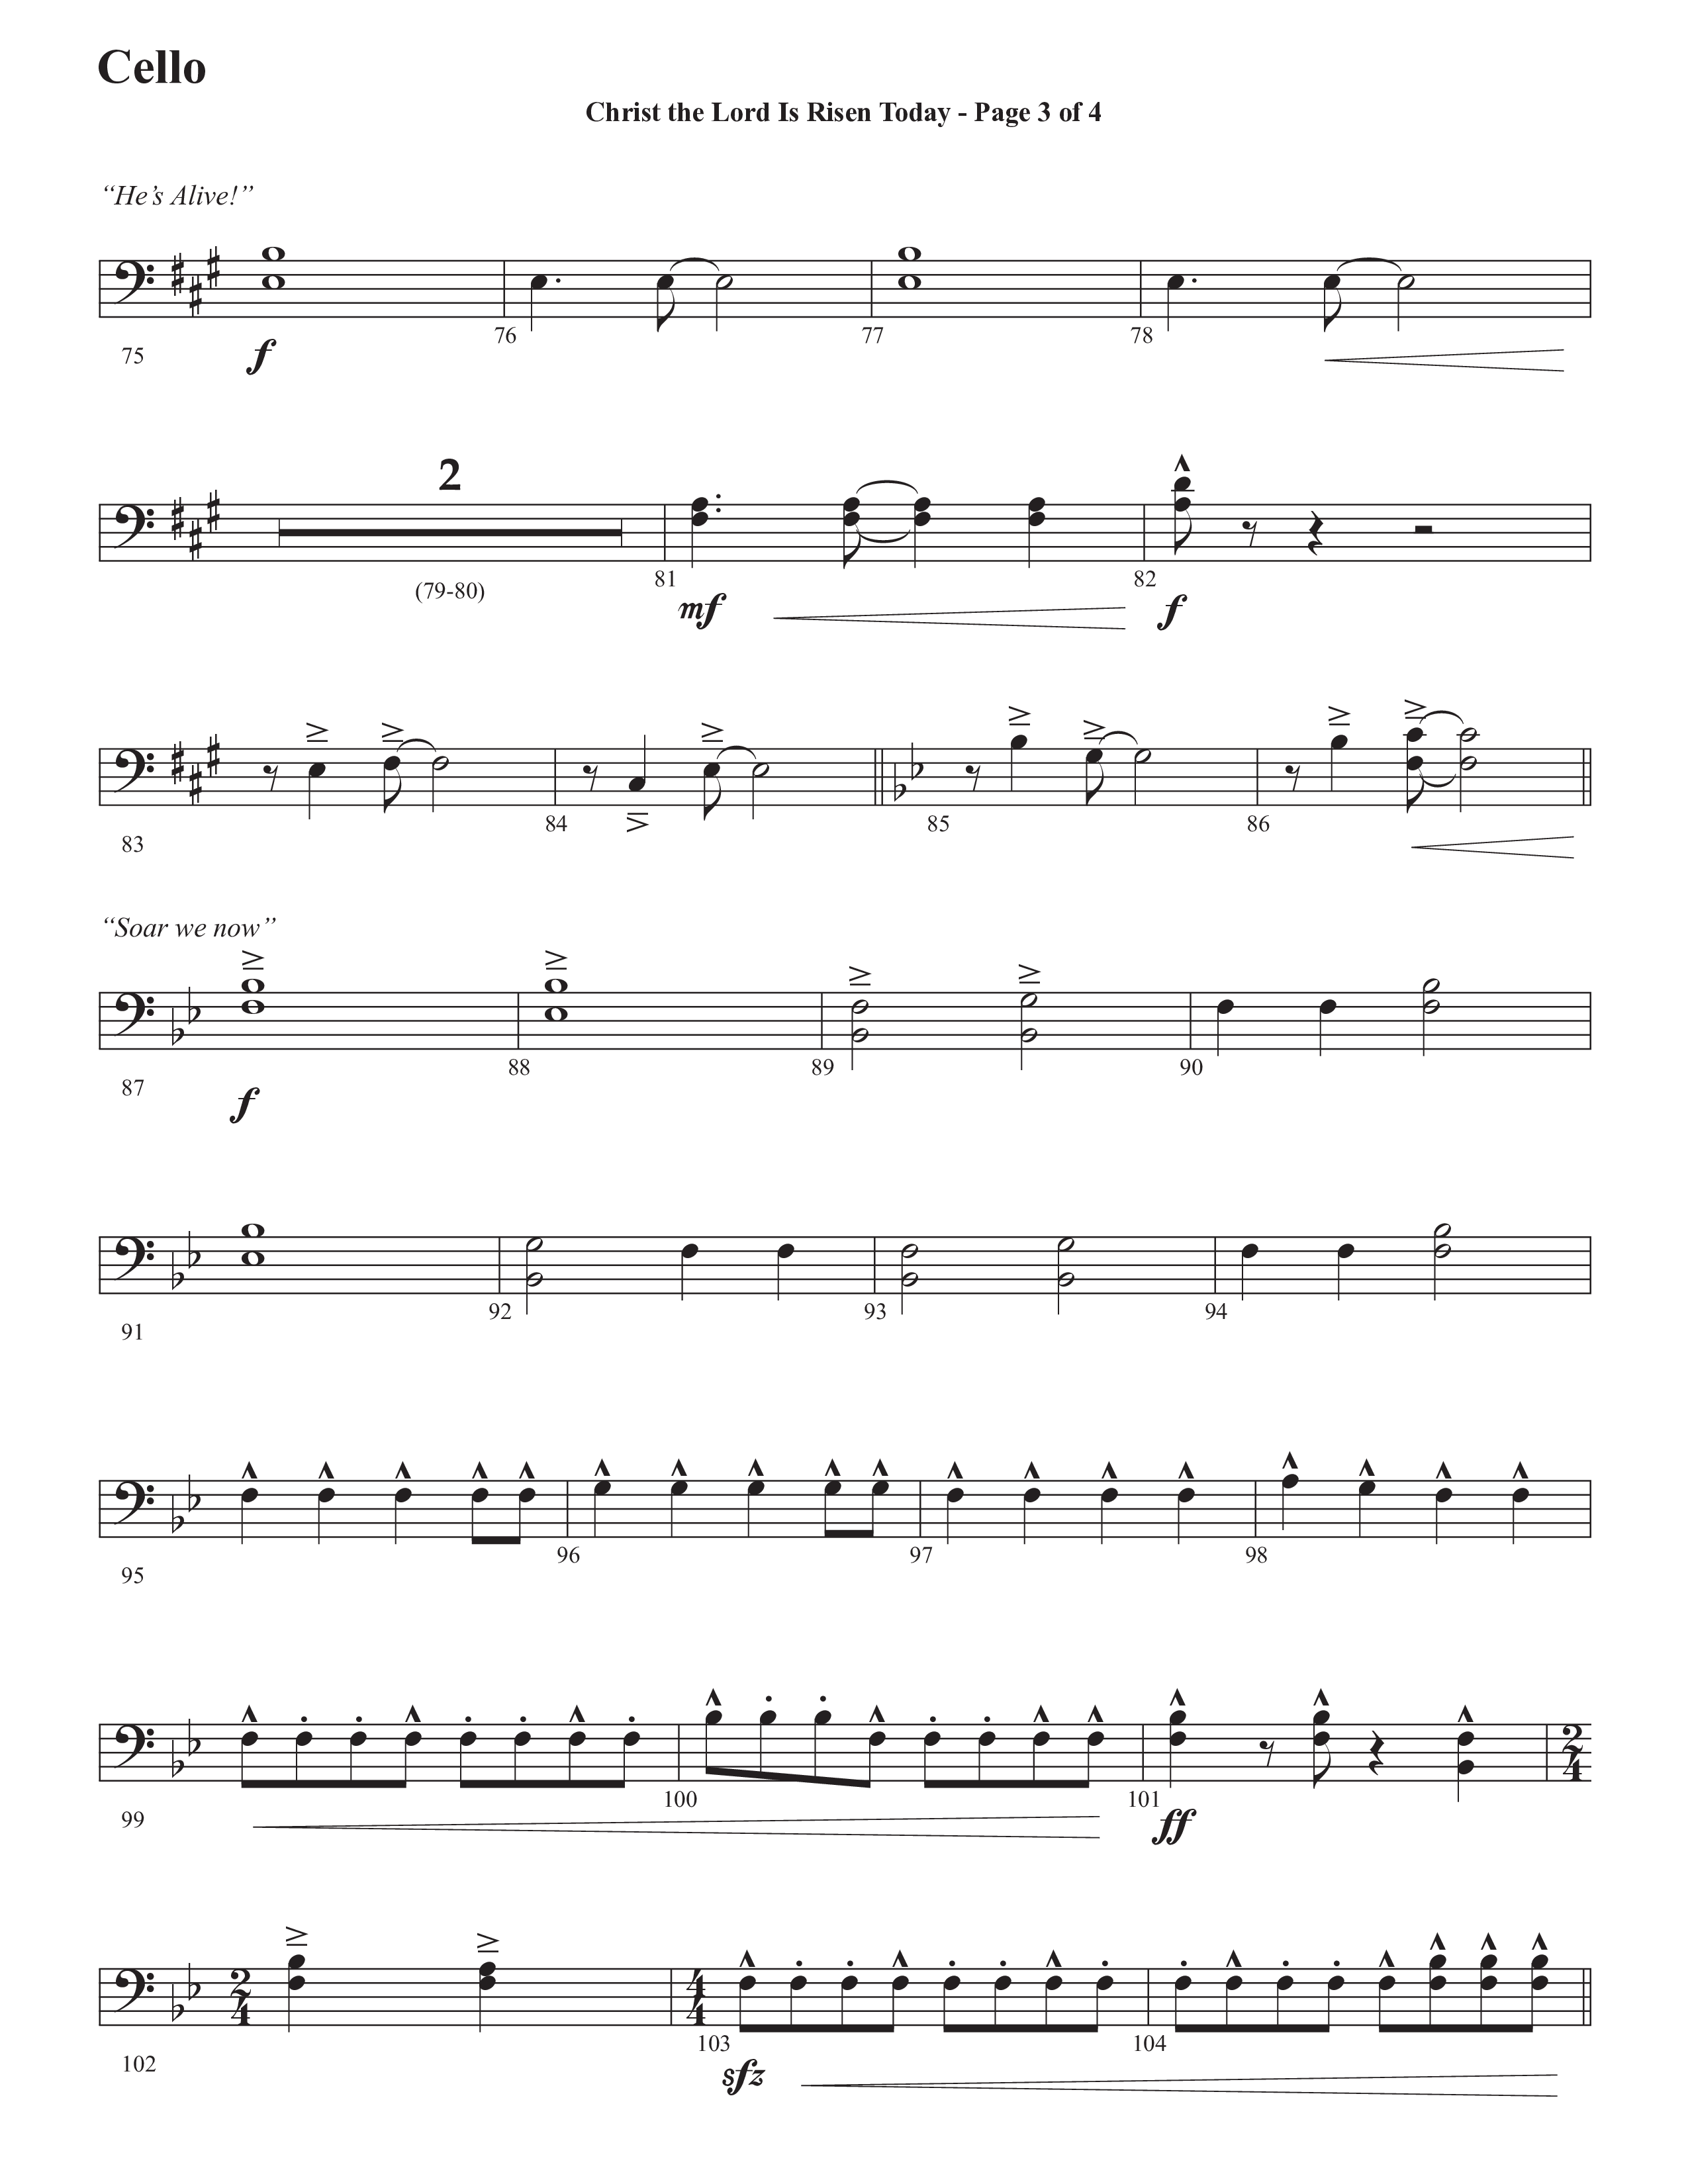 Christ The Lord Is Risen Today (He's Alive) (Choral Anthem SATB) Cello (Semsen Music / Arr. John Bolin / Orch. Cliff Duren)